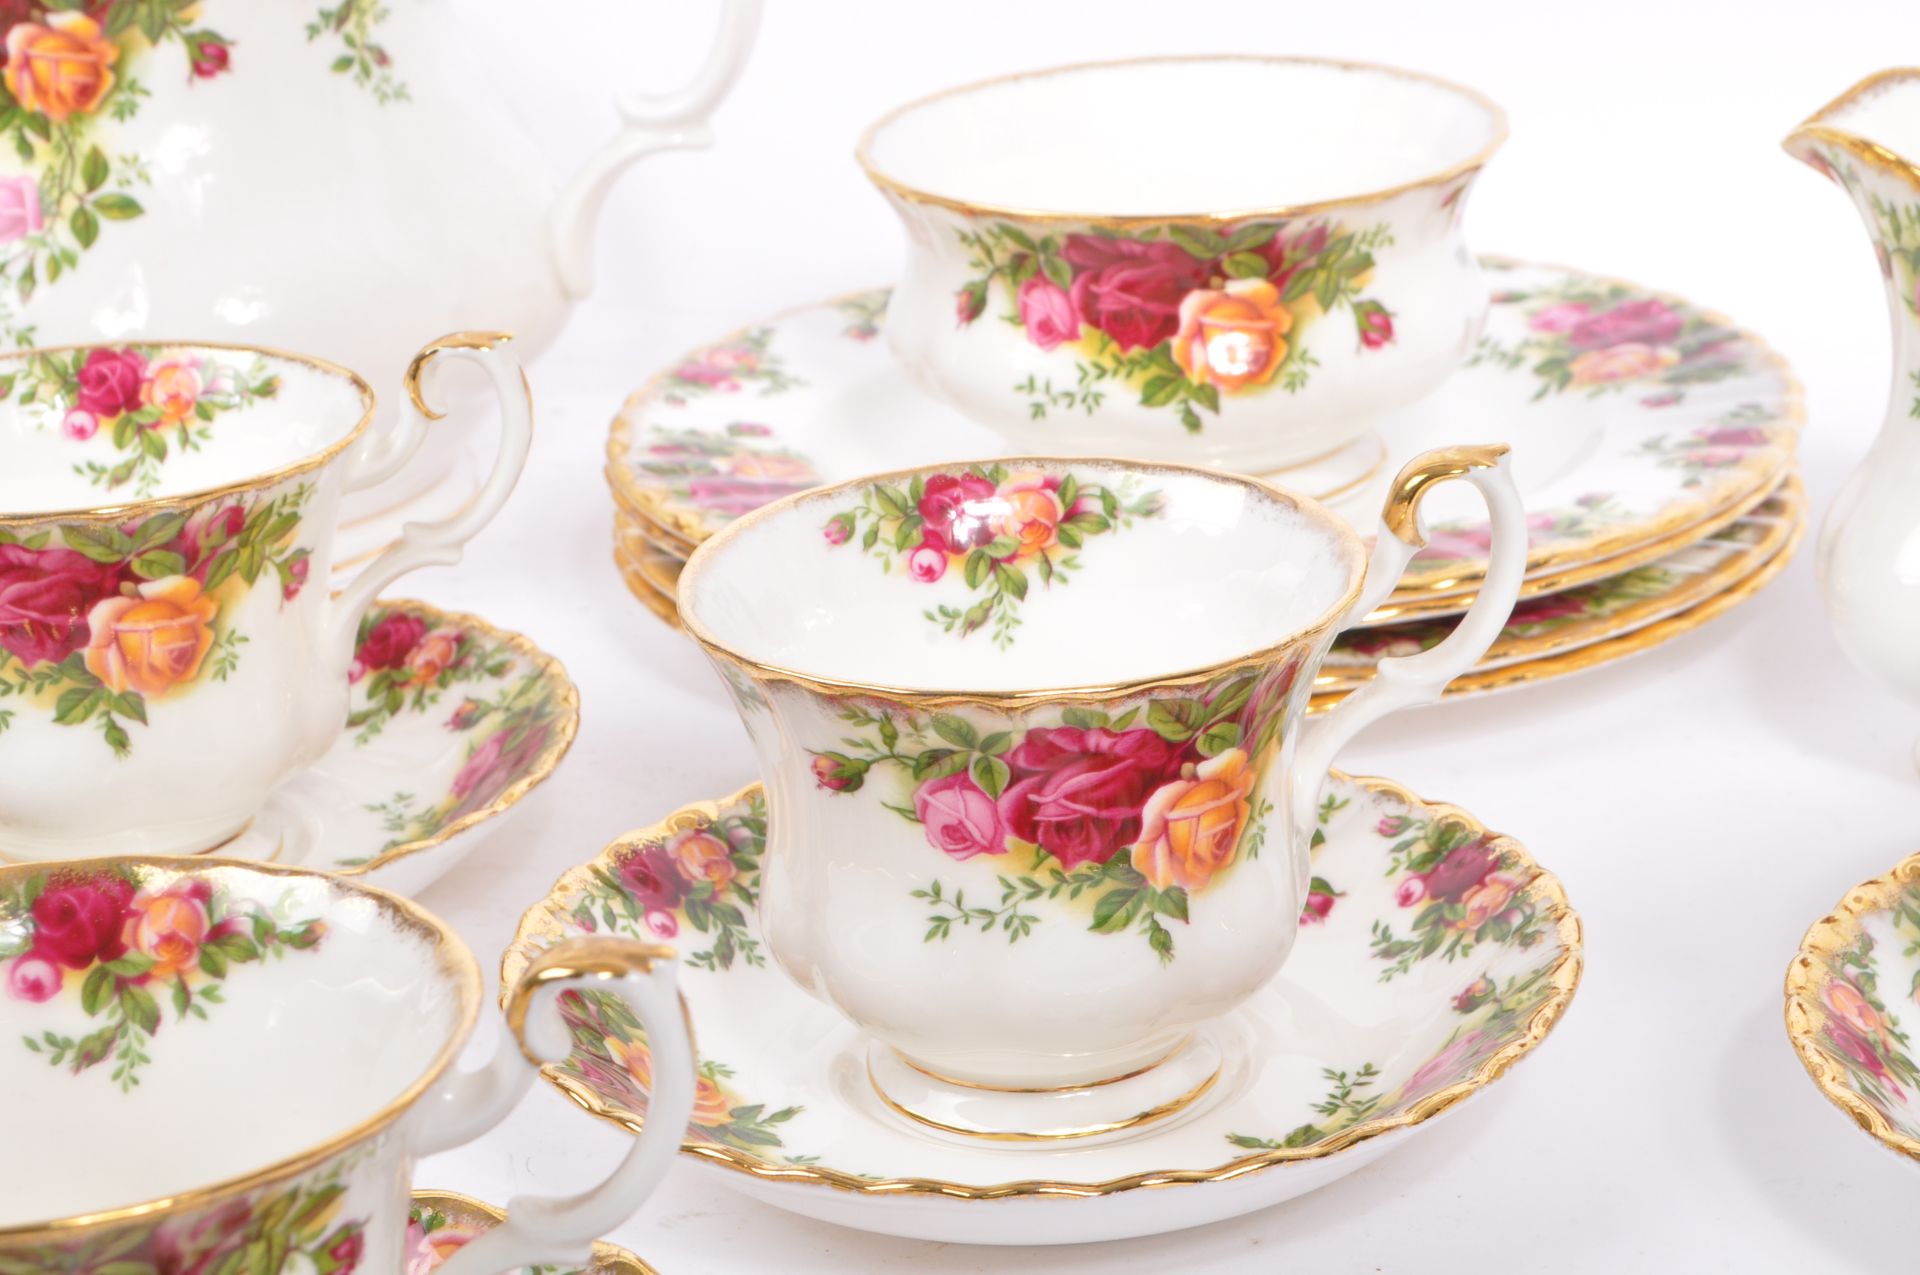 MID 20TH CENTURY OLD COUNTRY ROSES ROYAL ALBERT TEA SET - Image 7 of 8